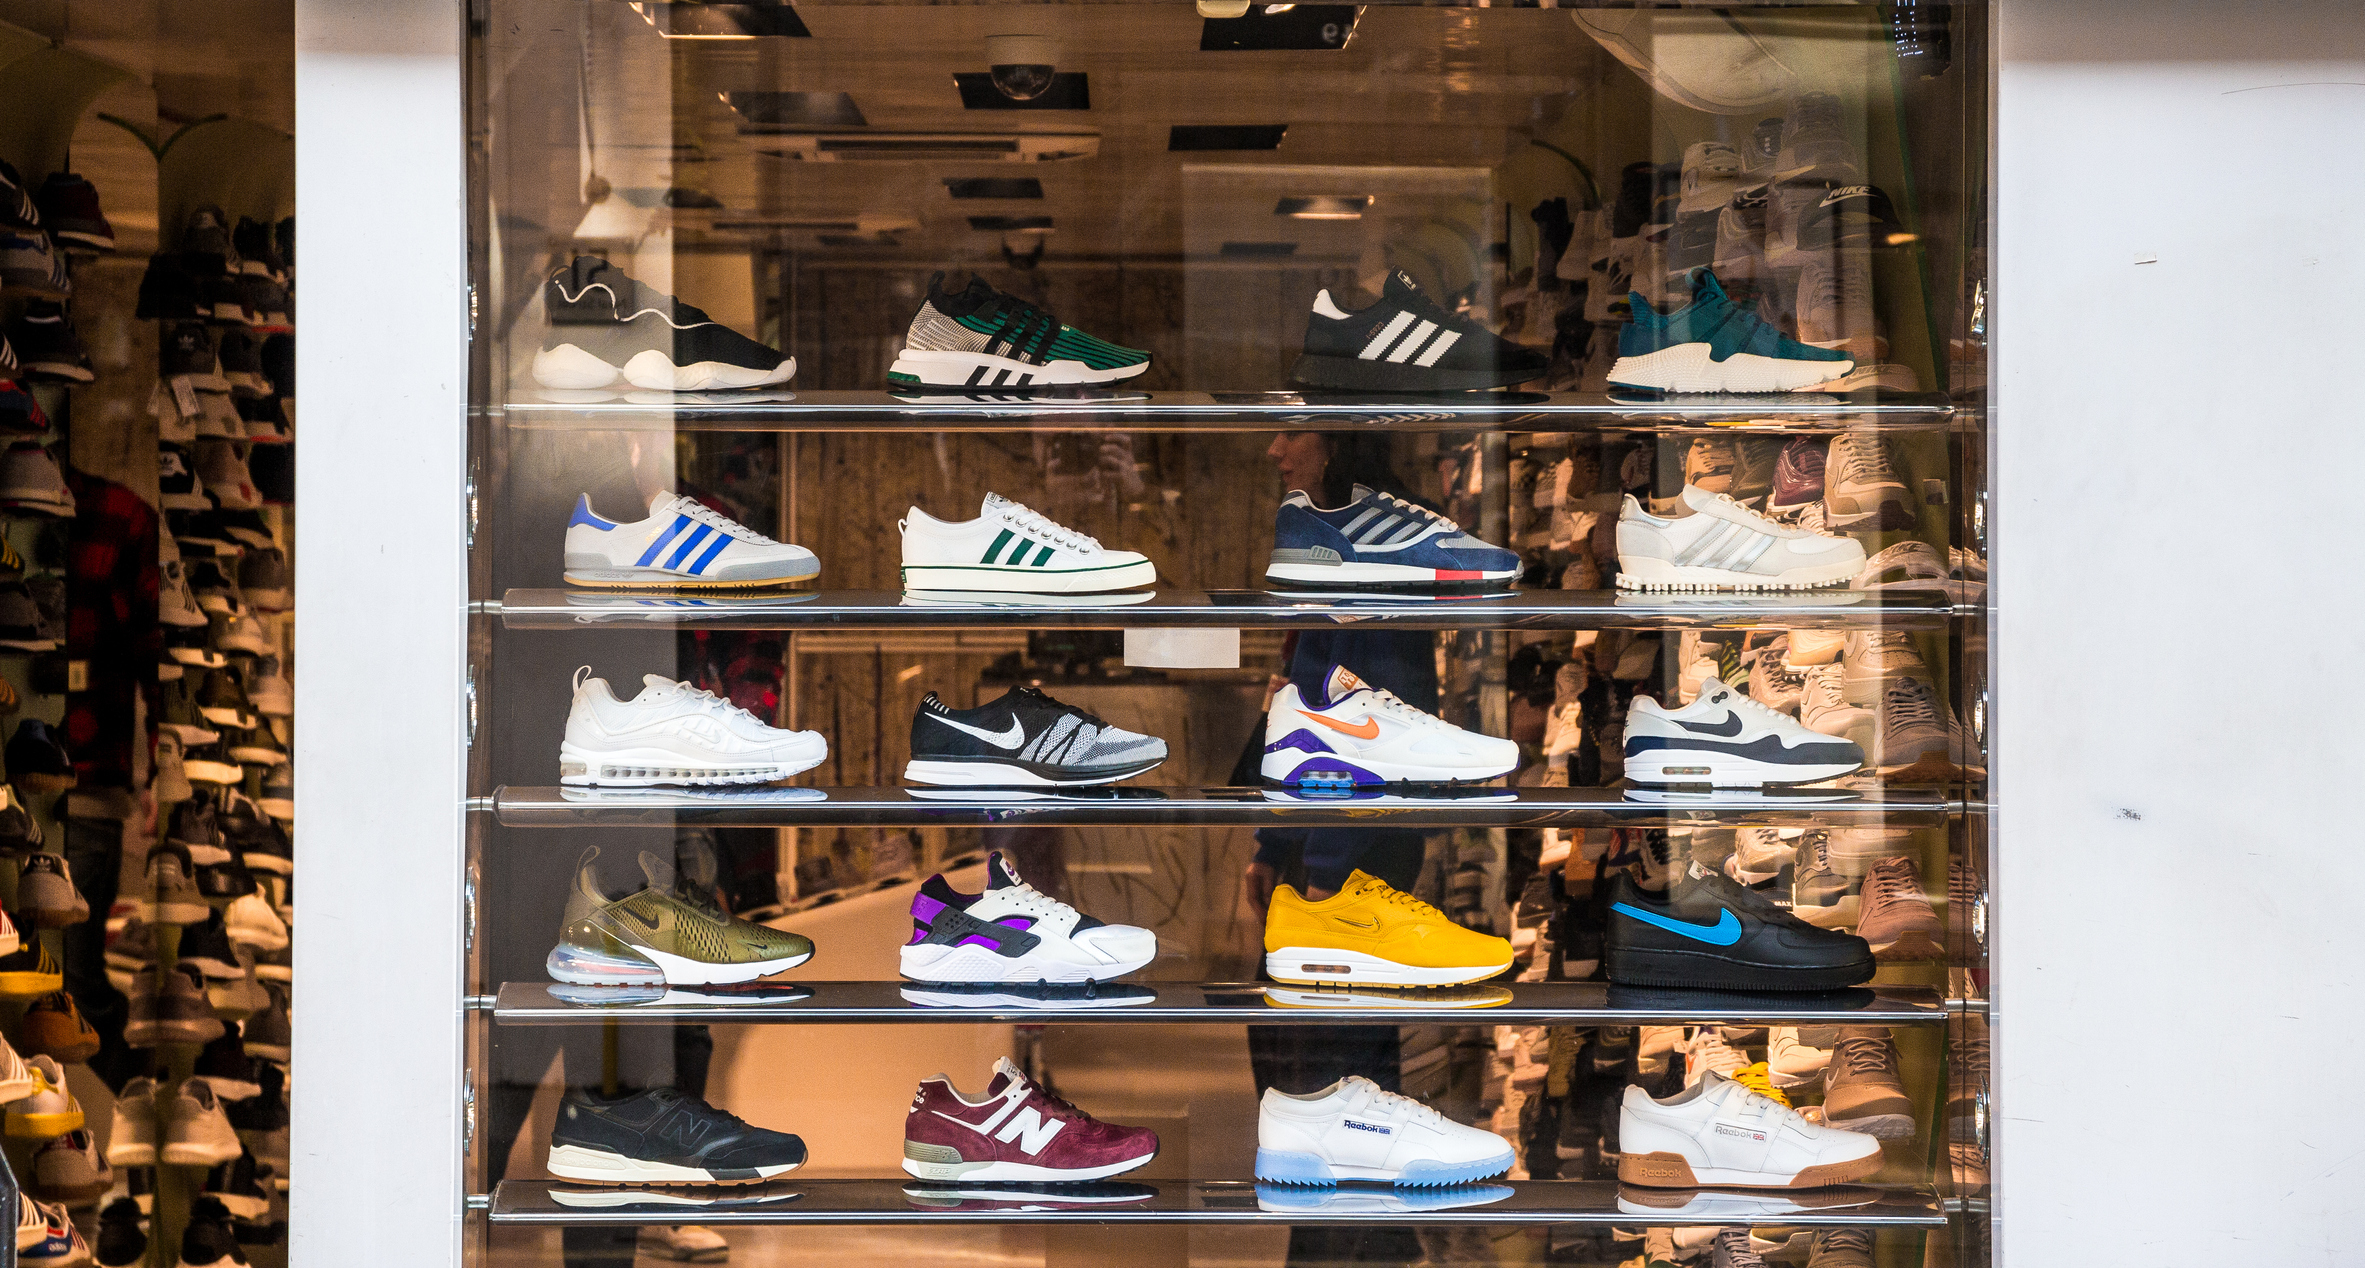 A shoe display in a window